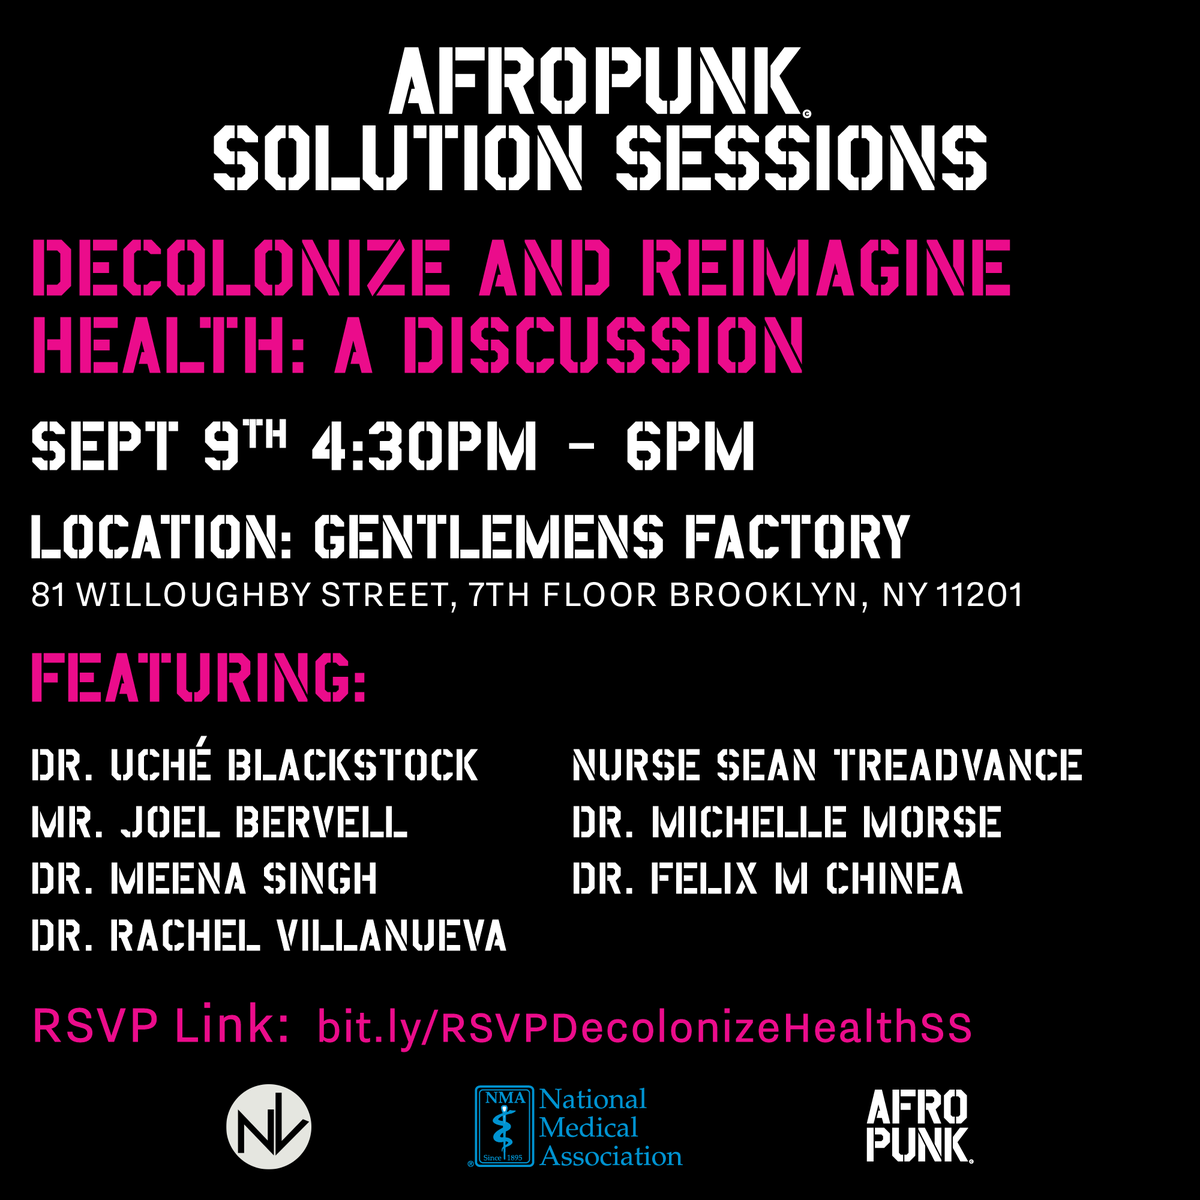 If you're in the NYC area, please join @NationalMedAssn, @NEWVoicesFamily and @Afropunk for Solution Sessions. The discussion will be 🔥. President Clunie will provide opening remarks. RSVP required as space is limited: bit.ly/RSVPDecolonize…. #Health @DrRachelSays